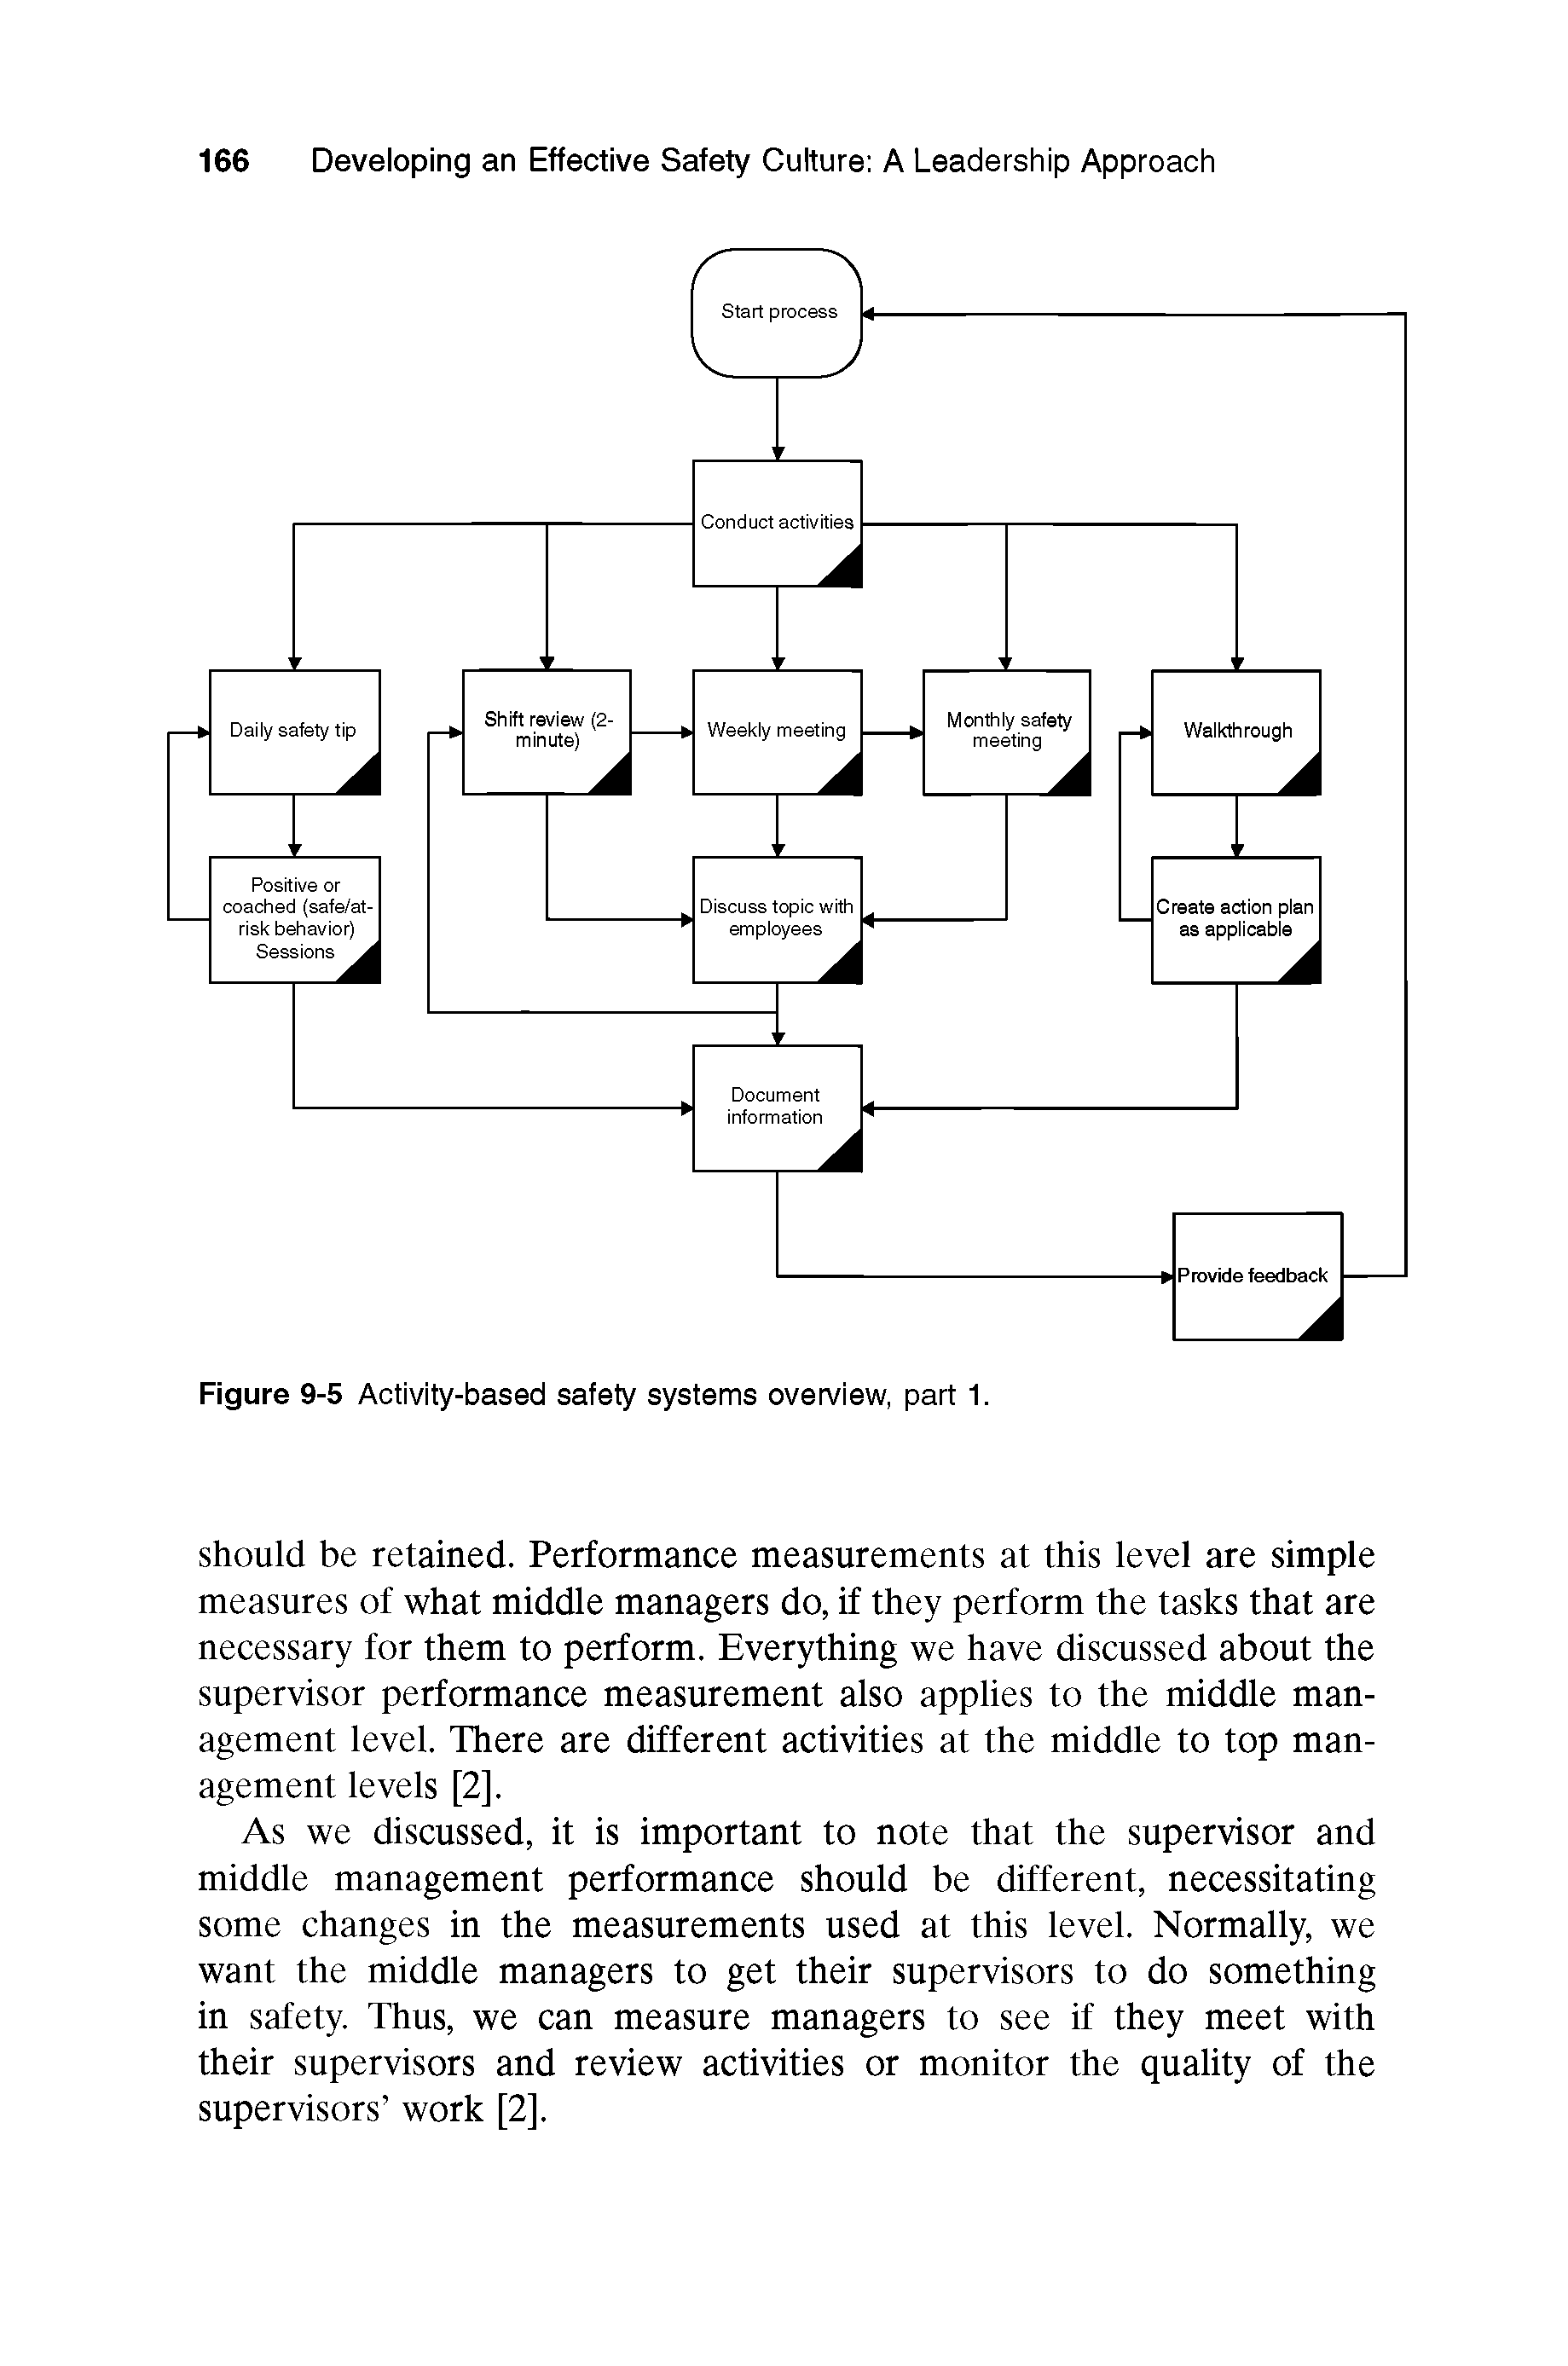 Figure 9-5 Activity-based safety systems ovenriew, part 1.